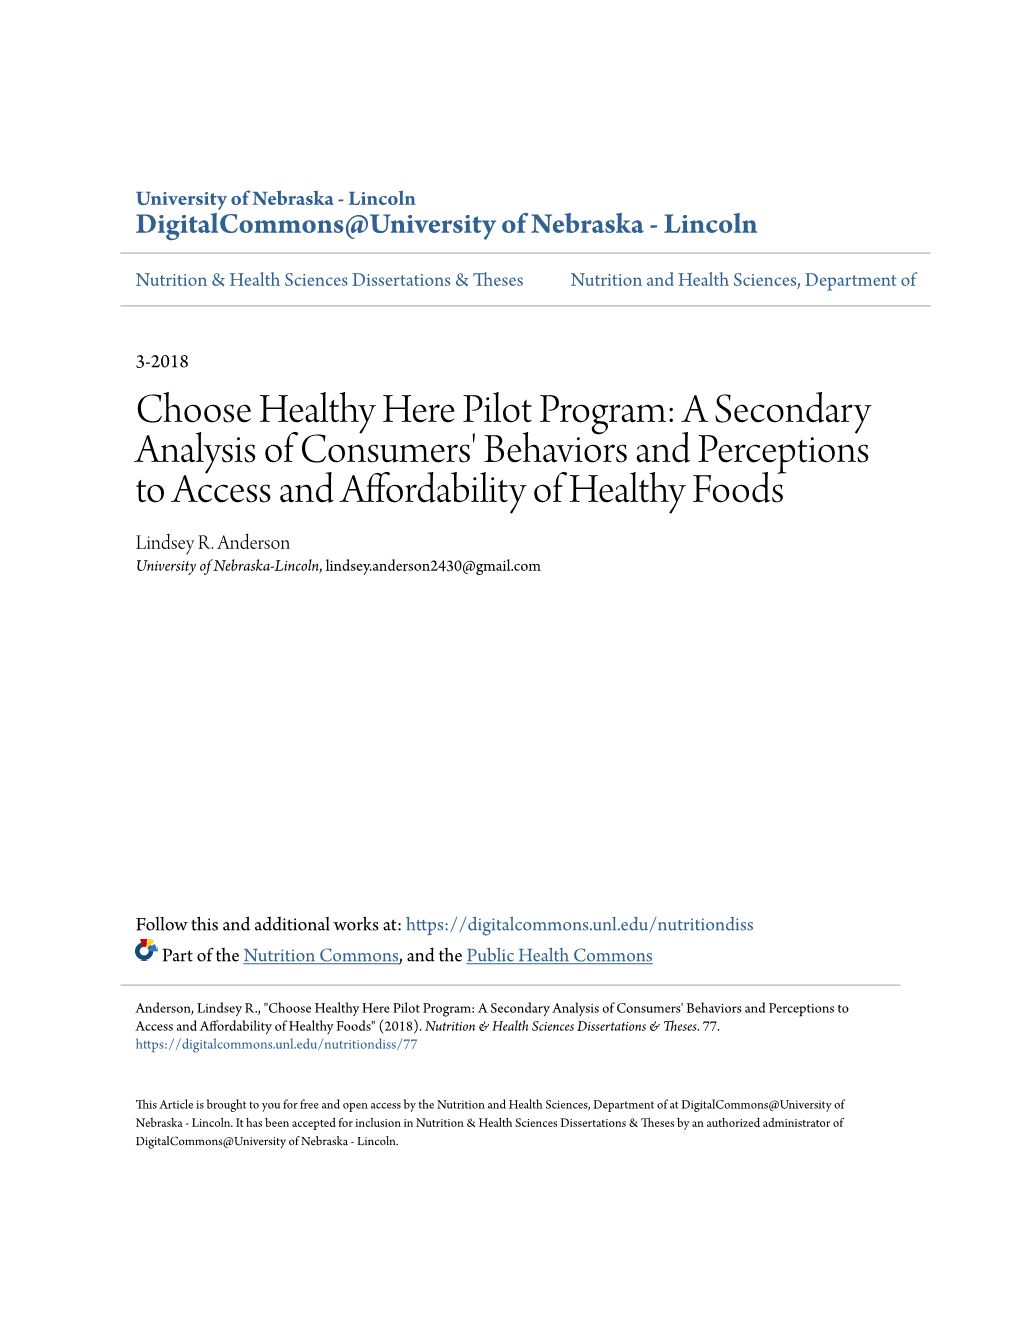 Choose Healthy Here Pilot Program: a Secondary Analysis of Consumers' Behaviors and Perceptions to Access and Affordability of Healthy Foods Lindsey R